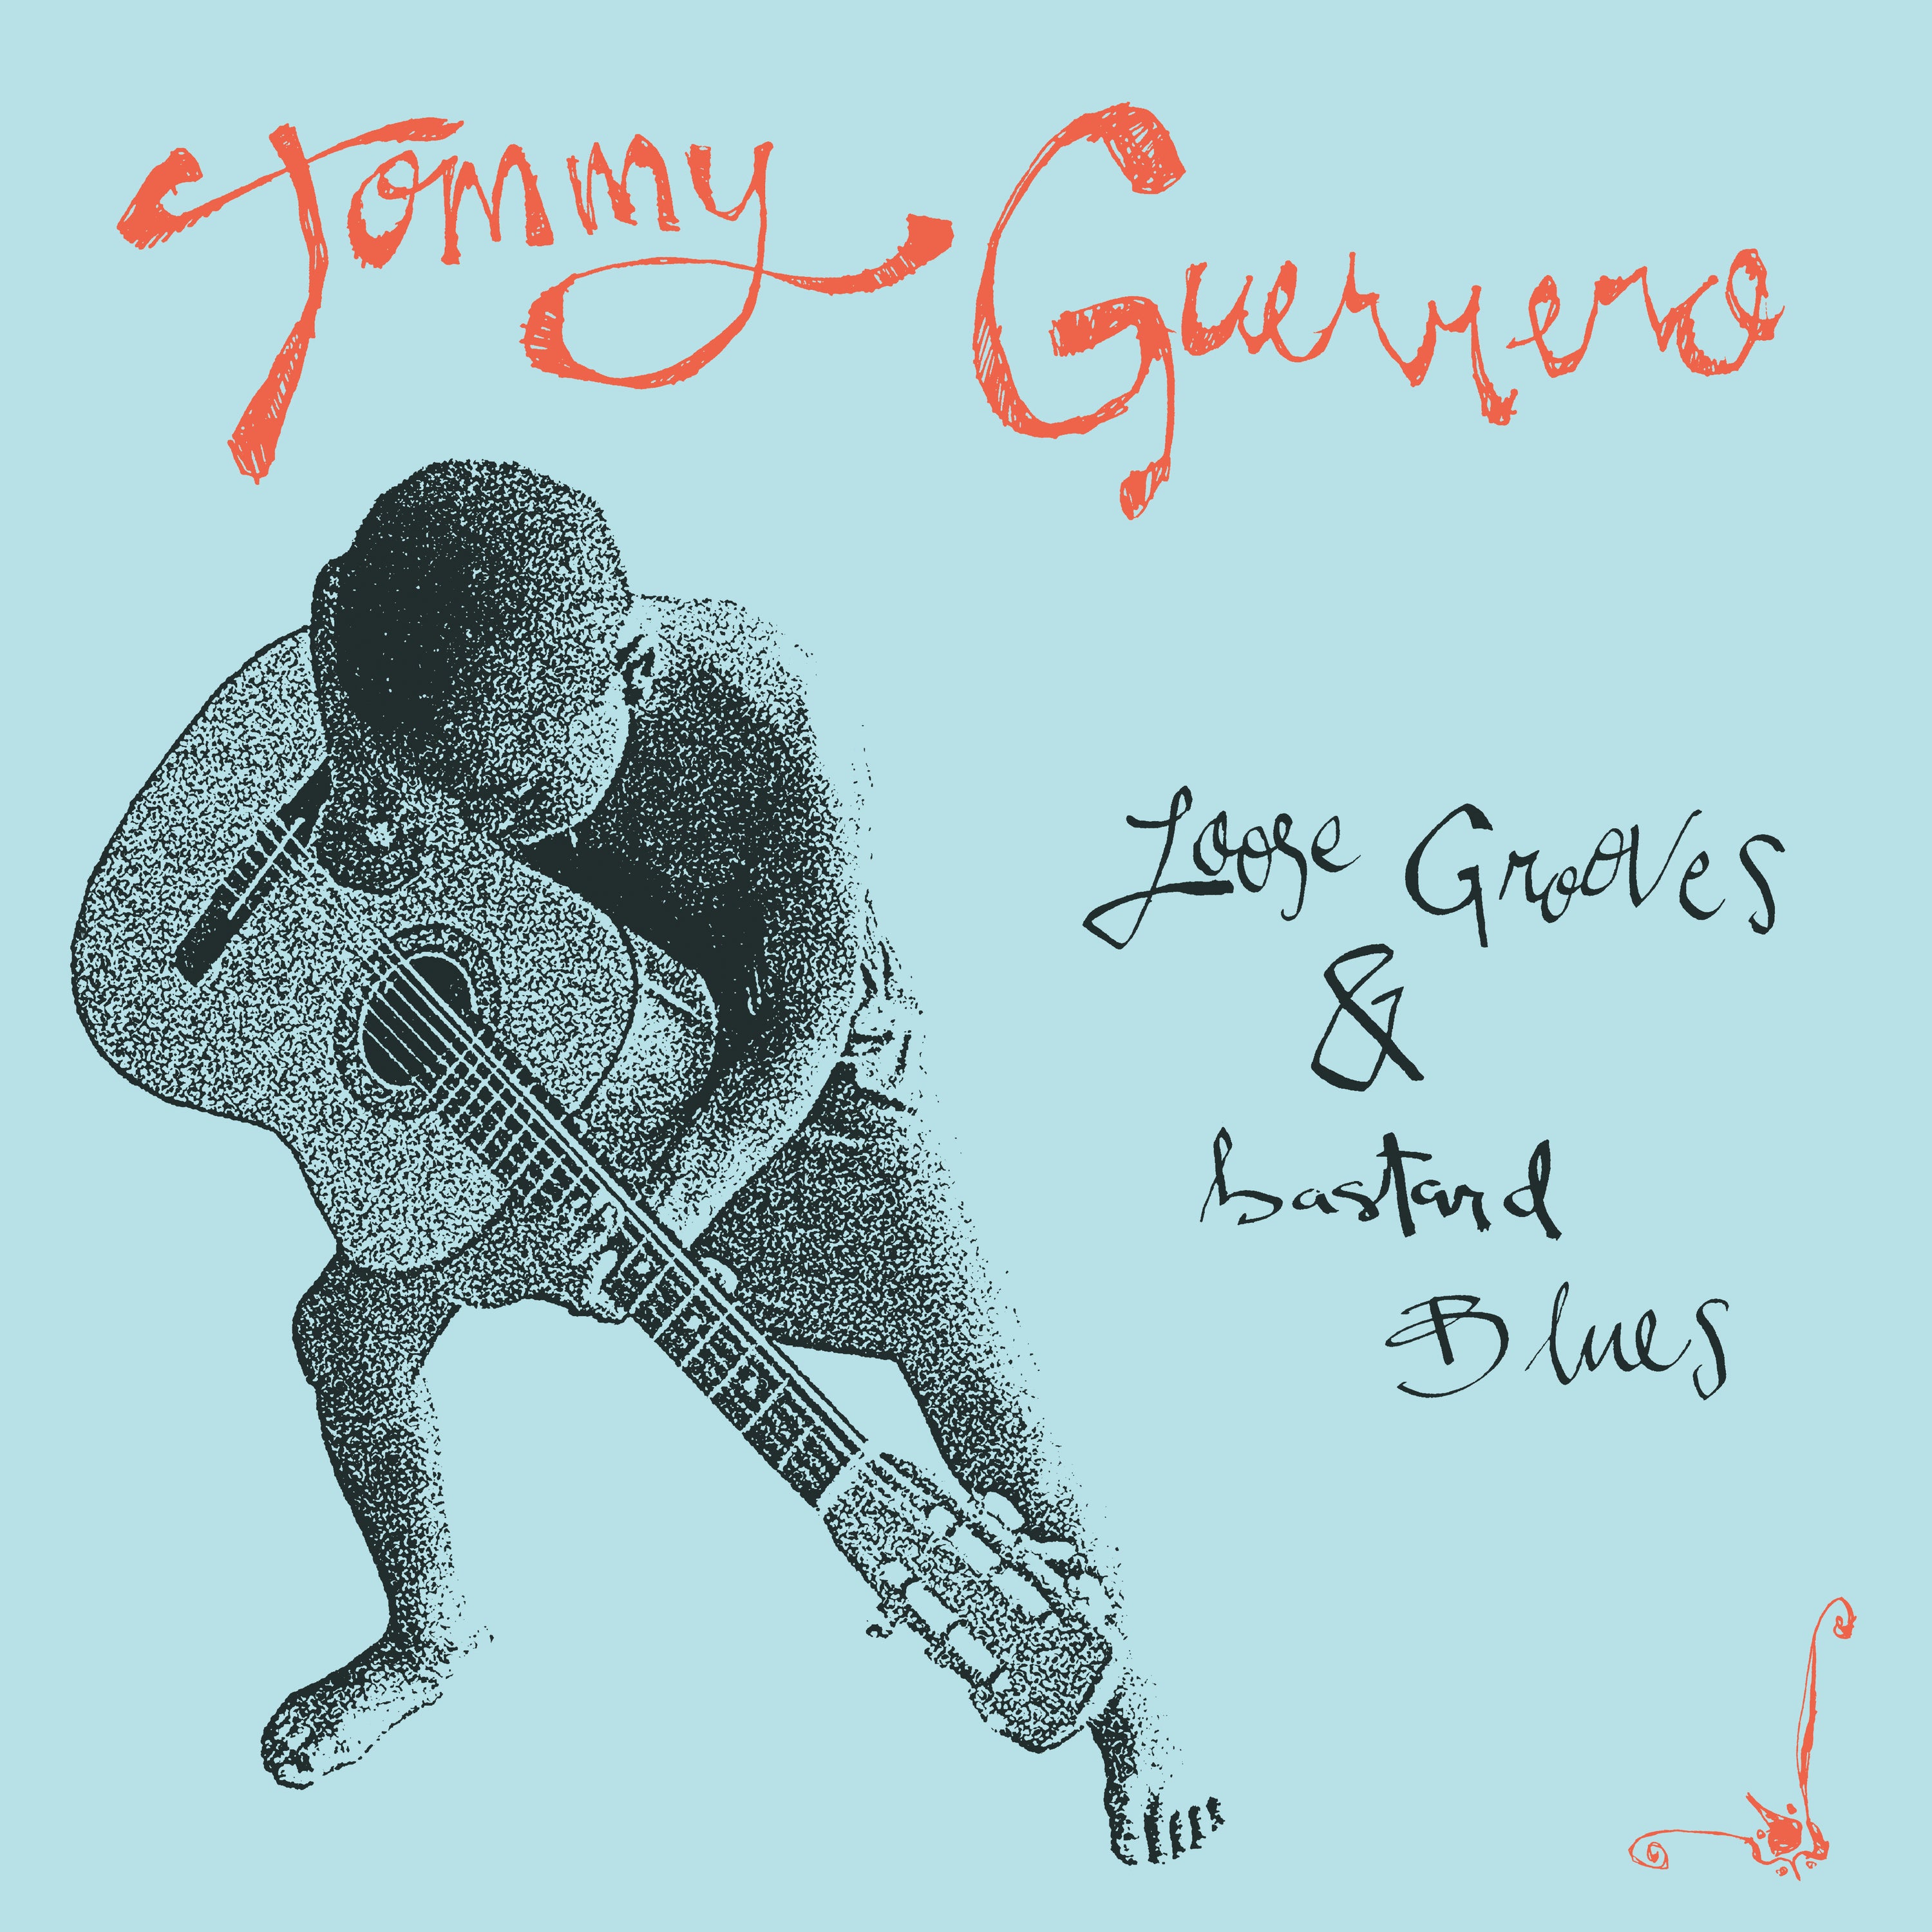 Tommy Guerrero - Loose Grooves & Bastard